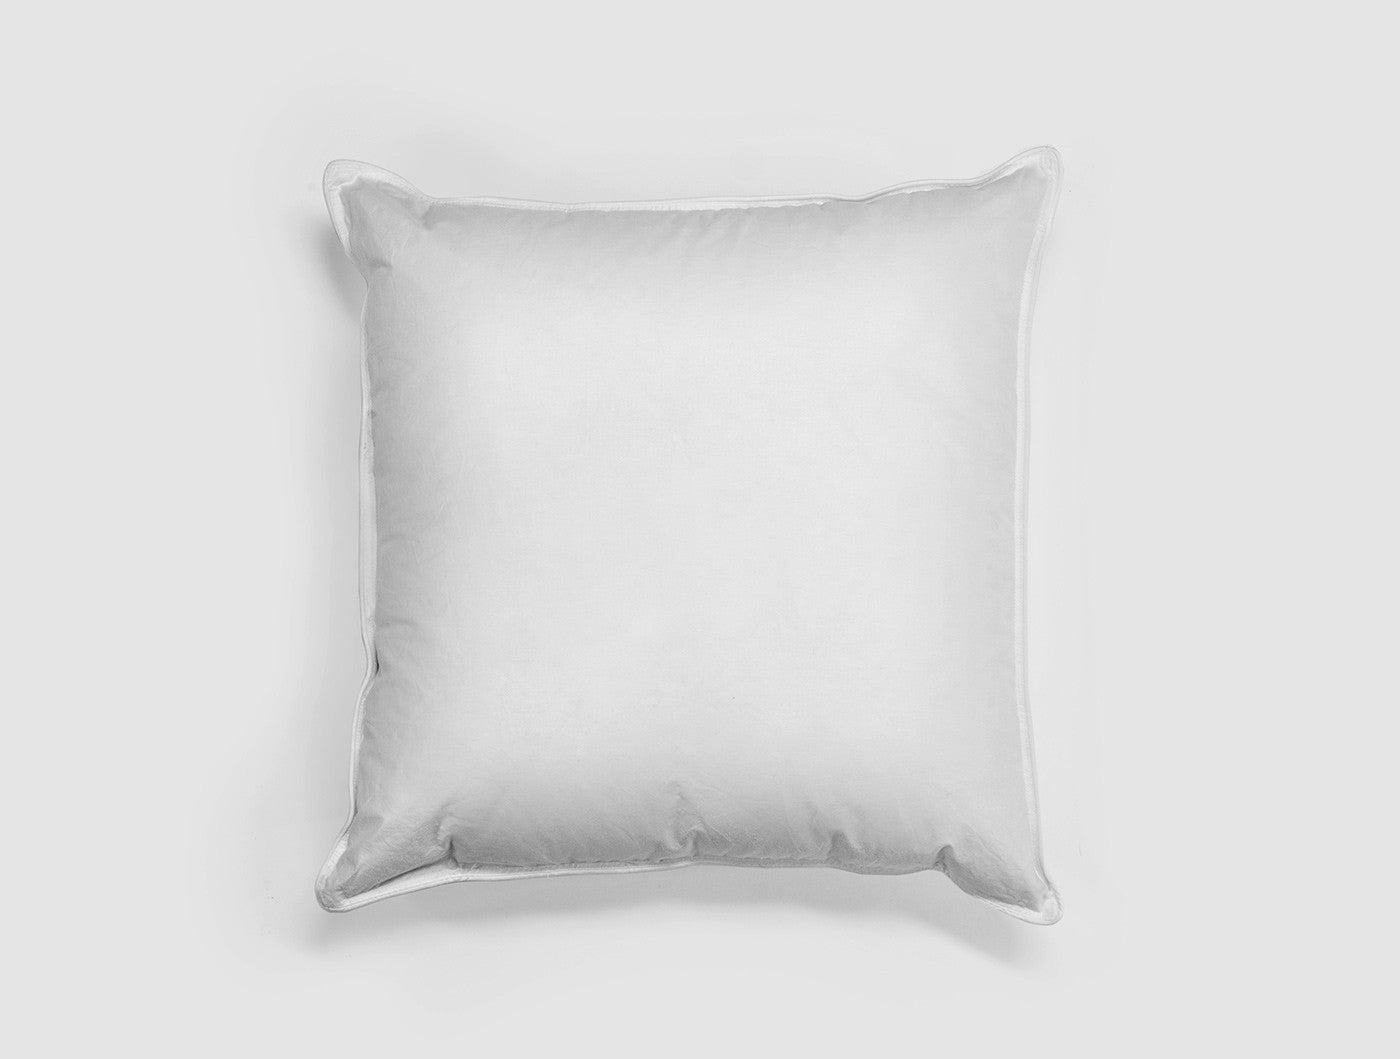 throw decorative pillow inserts 600 fill power by ogallala comfort on adorn.house